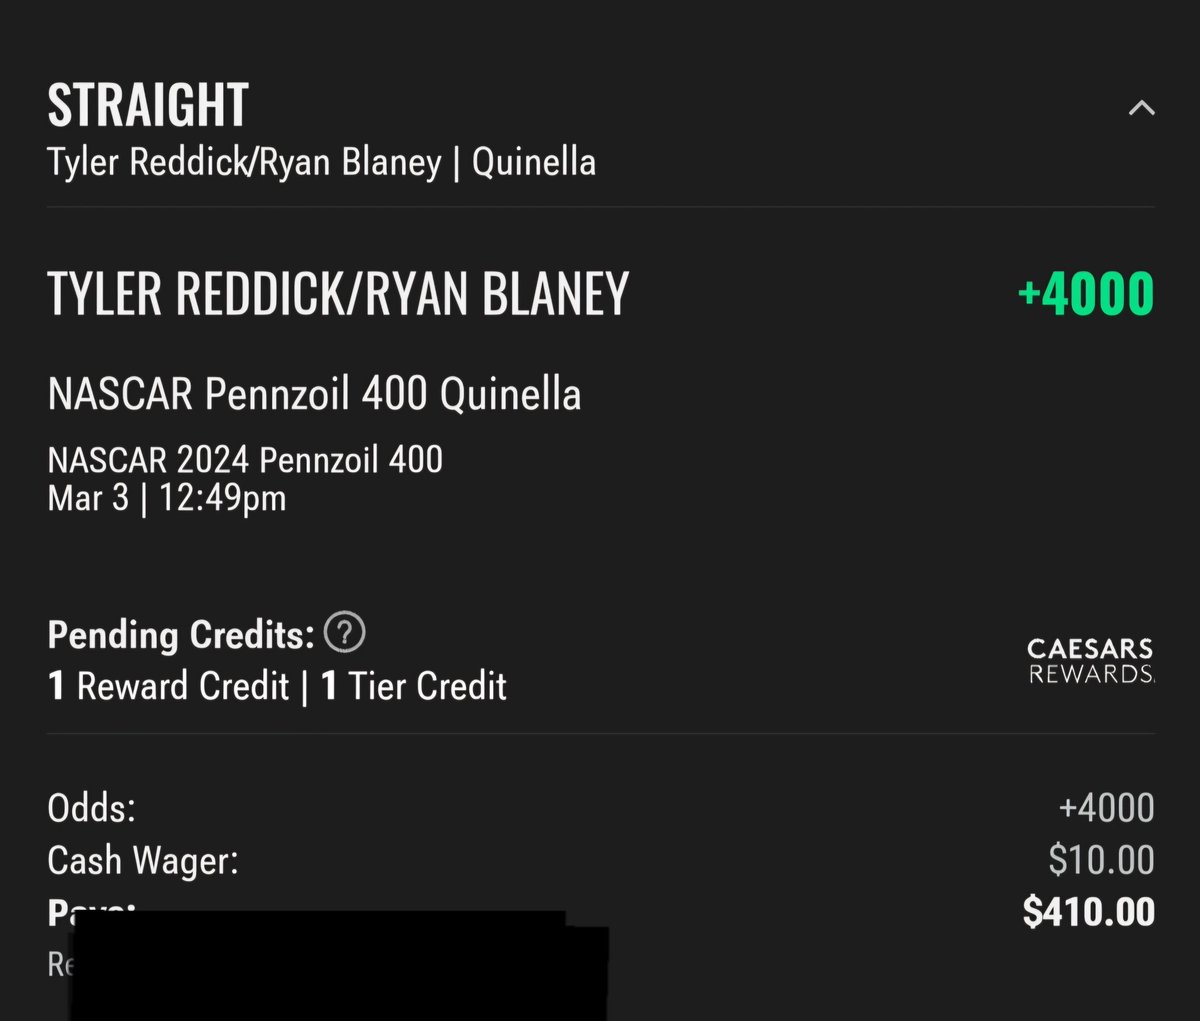 So close y'all 🤪 I wouldn't advise playing these often, but since I was in Vegas, I had to. And I felt very confident in my assessment of these cars. In the end, Kyle Larson proved why he's the #Championship4 favorite though. #Pennzoil400 #NASCAR #NASCARbetting